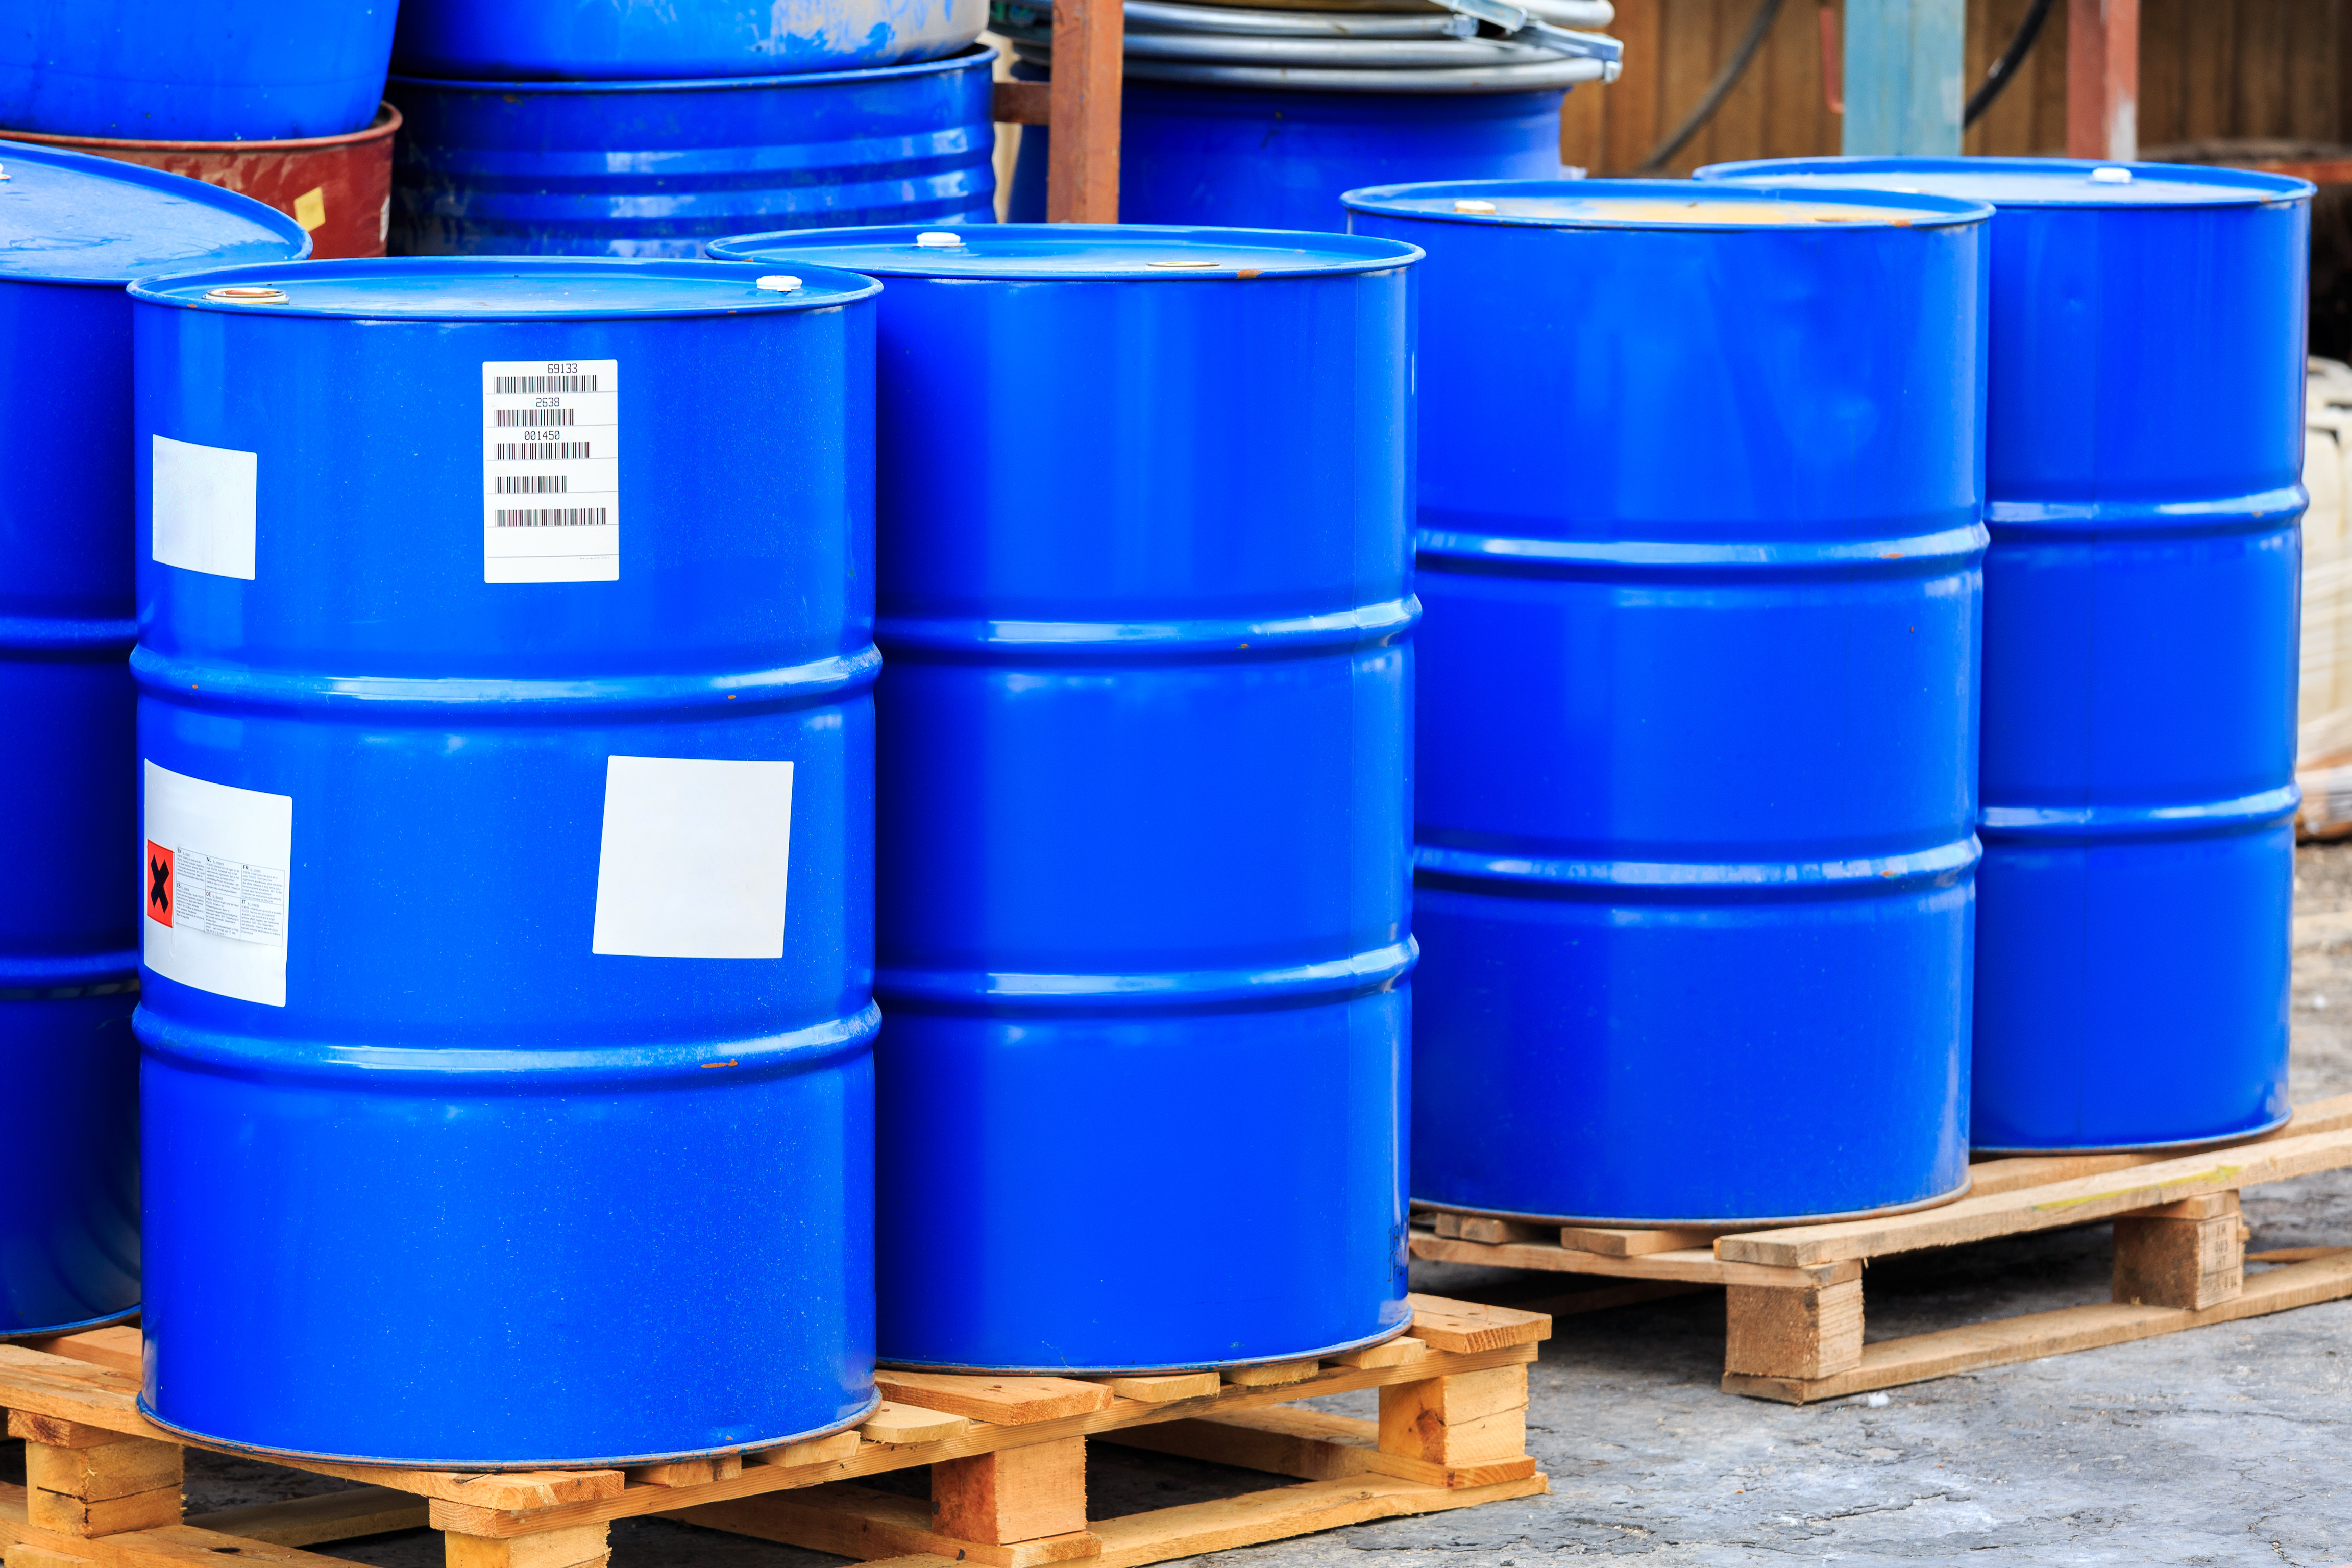 Regulatory compliance with dangerous goods, at all times